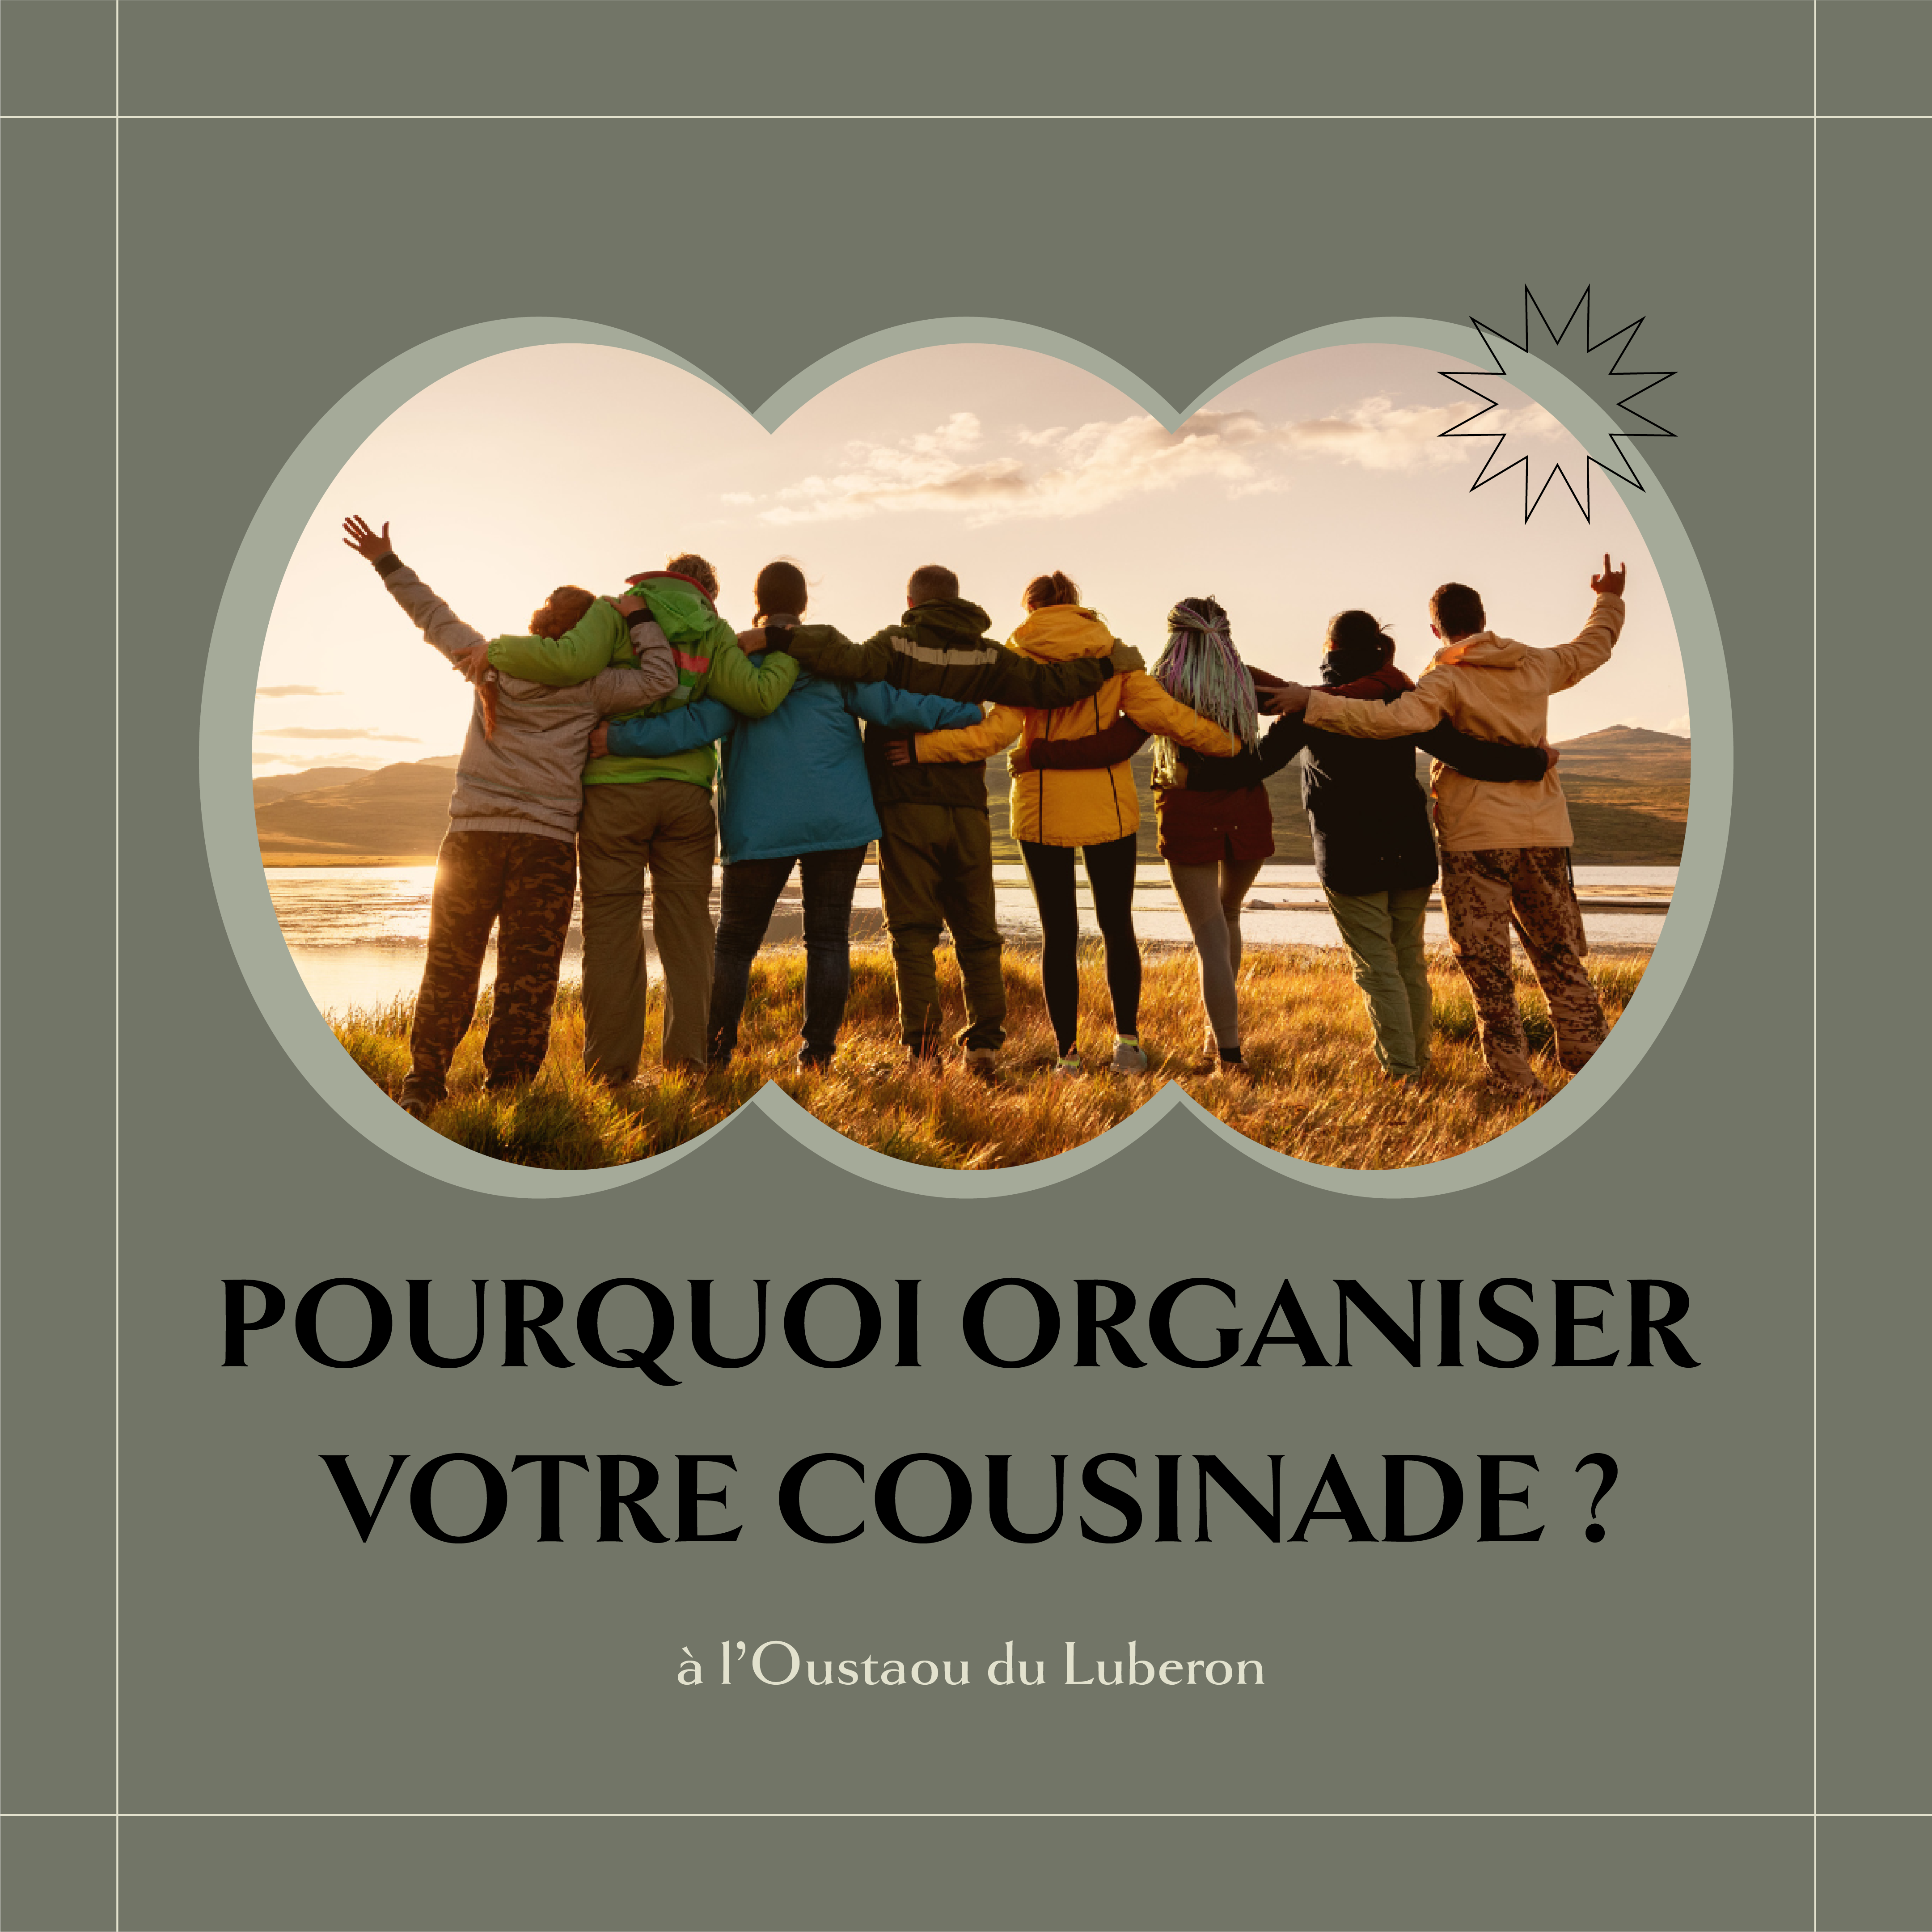 You are currently viewing Pourquoi organiser une cousinade ?